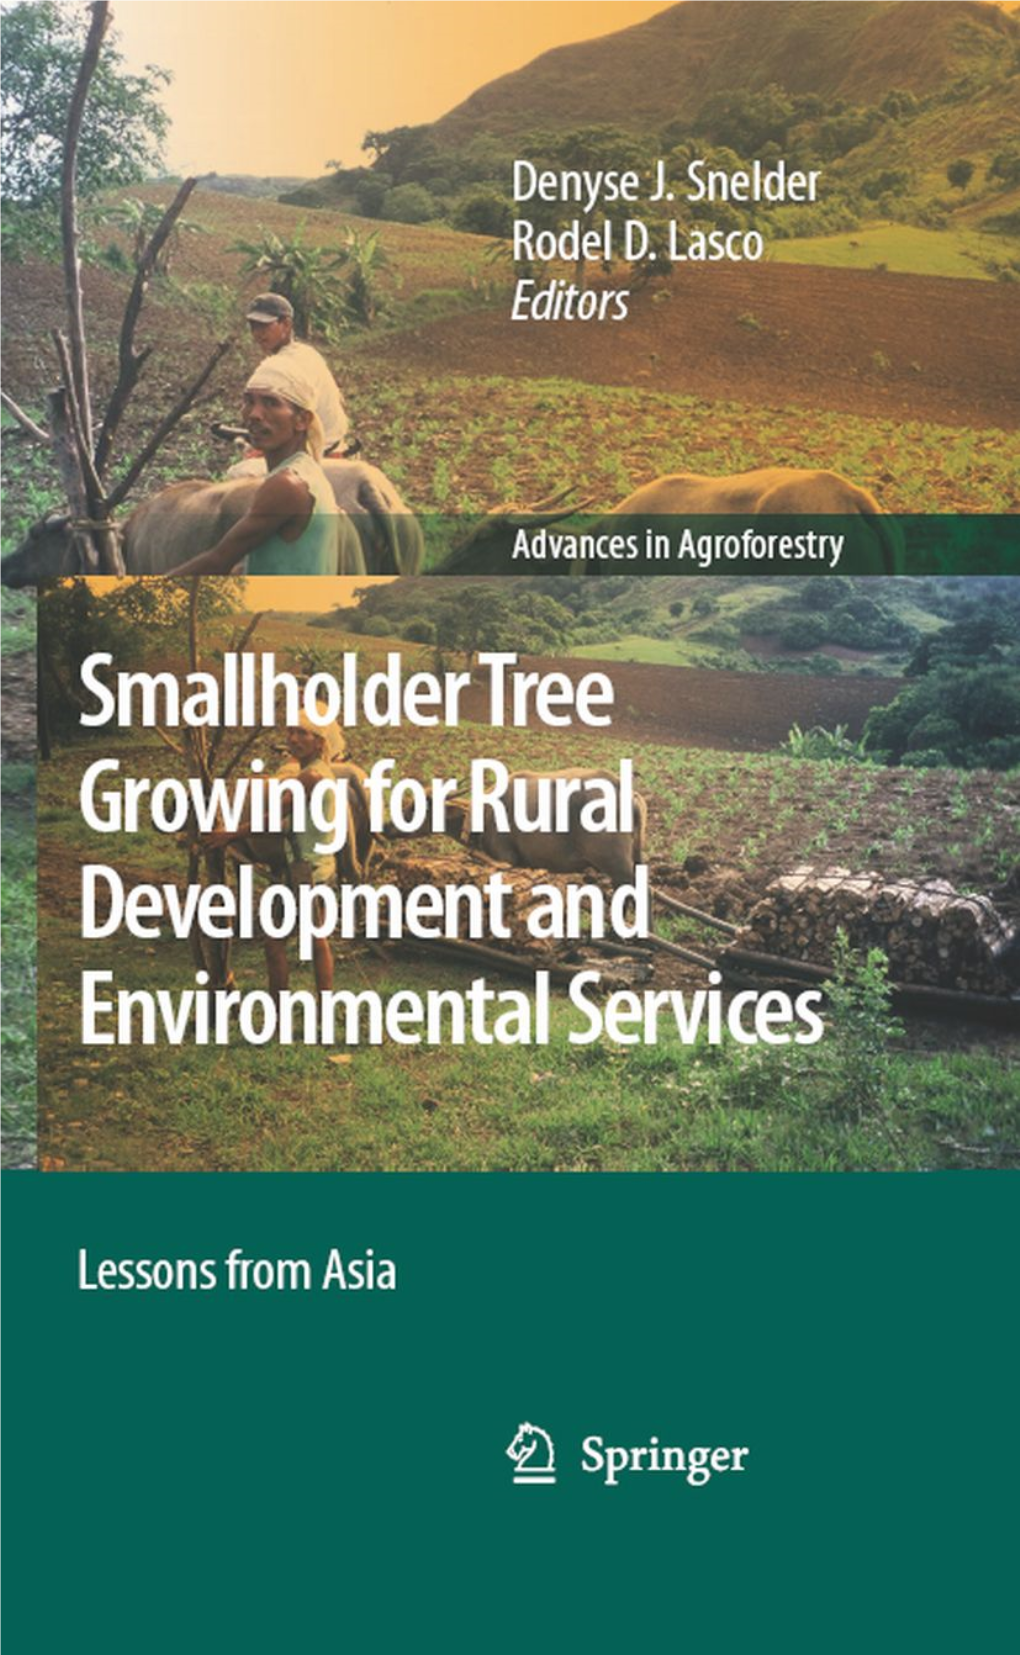 Smallholder Tree Growing in South and Southeast Asia